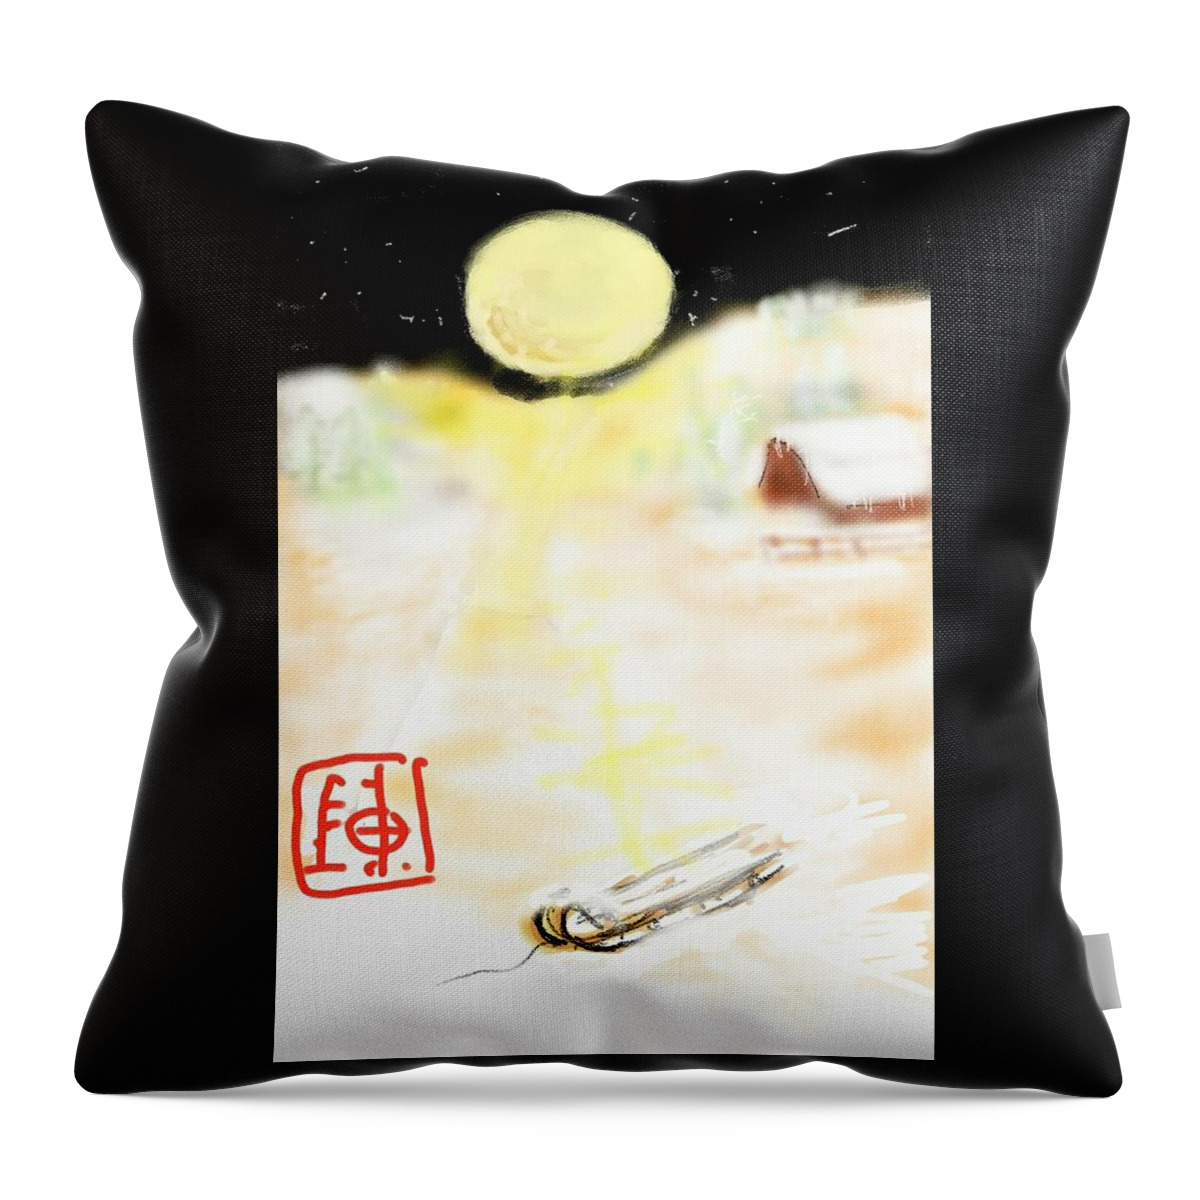 Landscape.full Moon Throw Pillow featuring the digital art From The Distance A Light by Debbi Saccomanno Chan